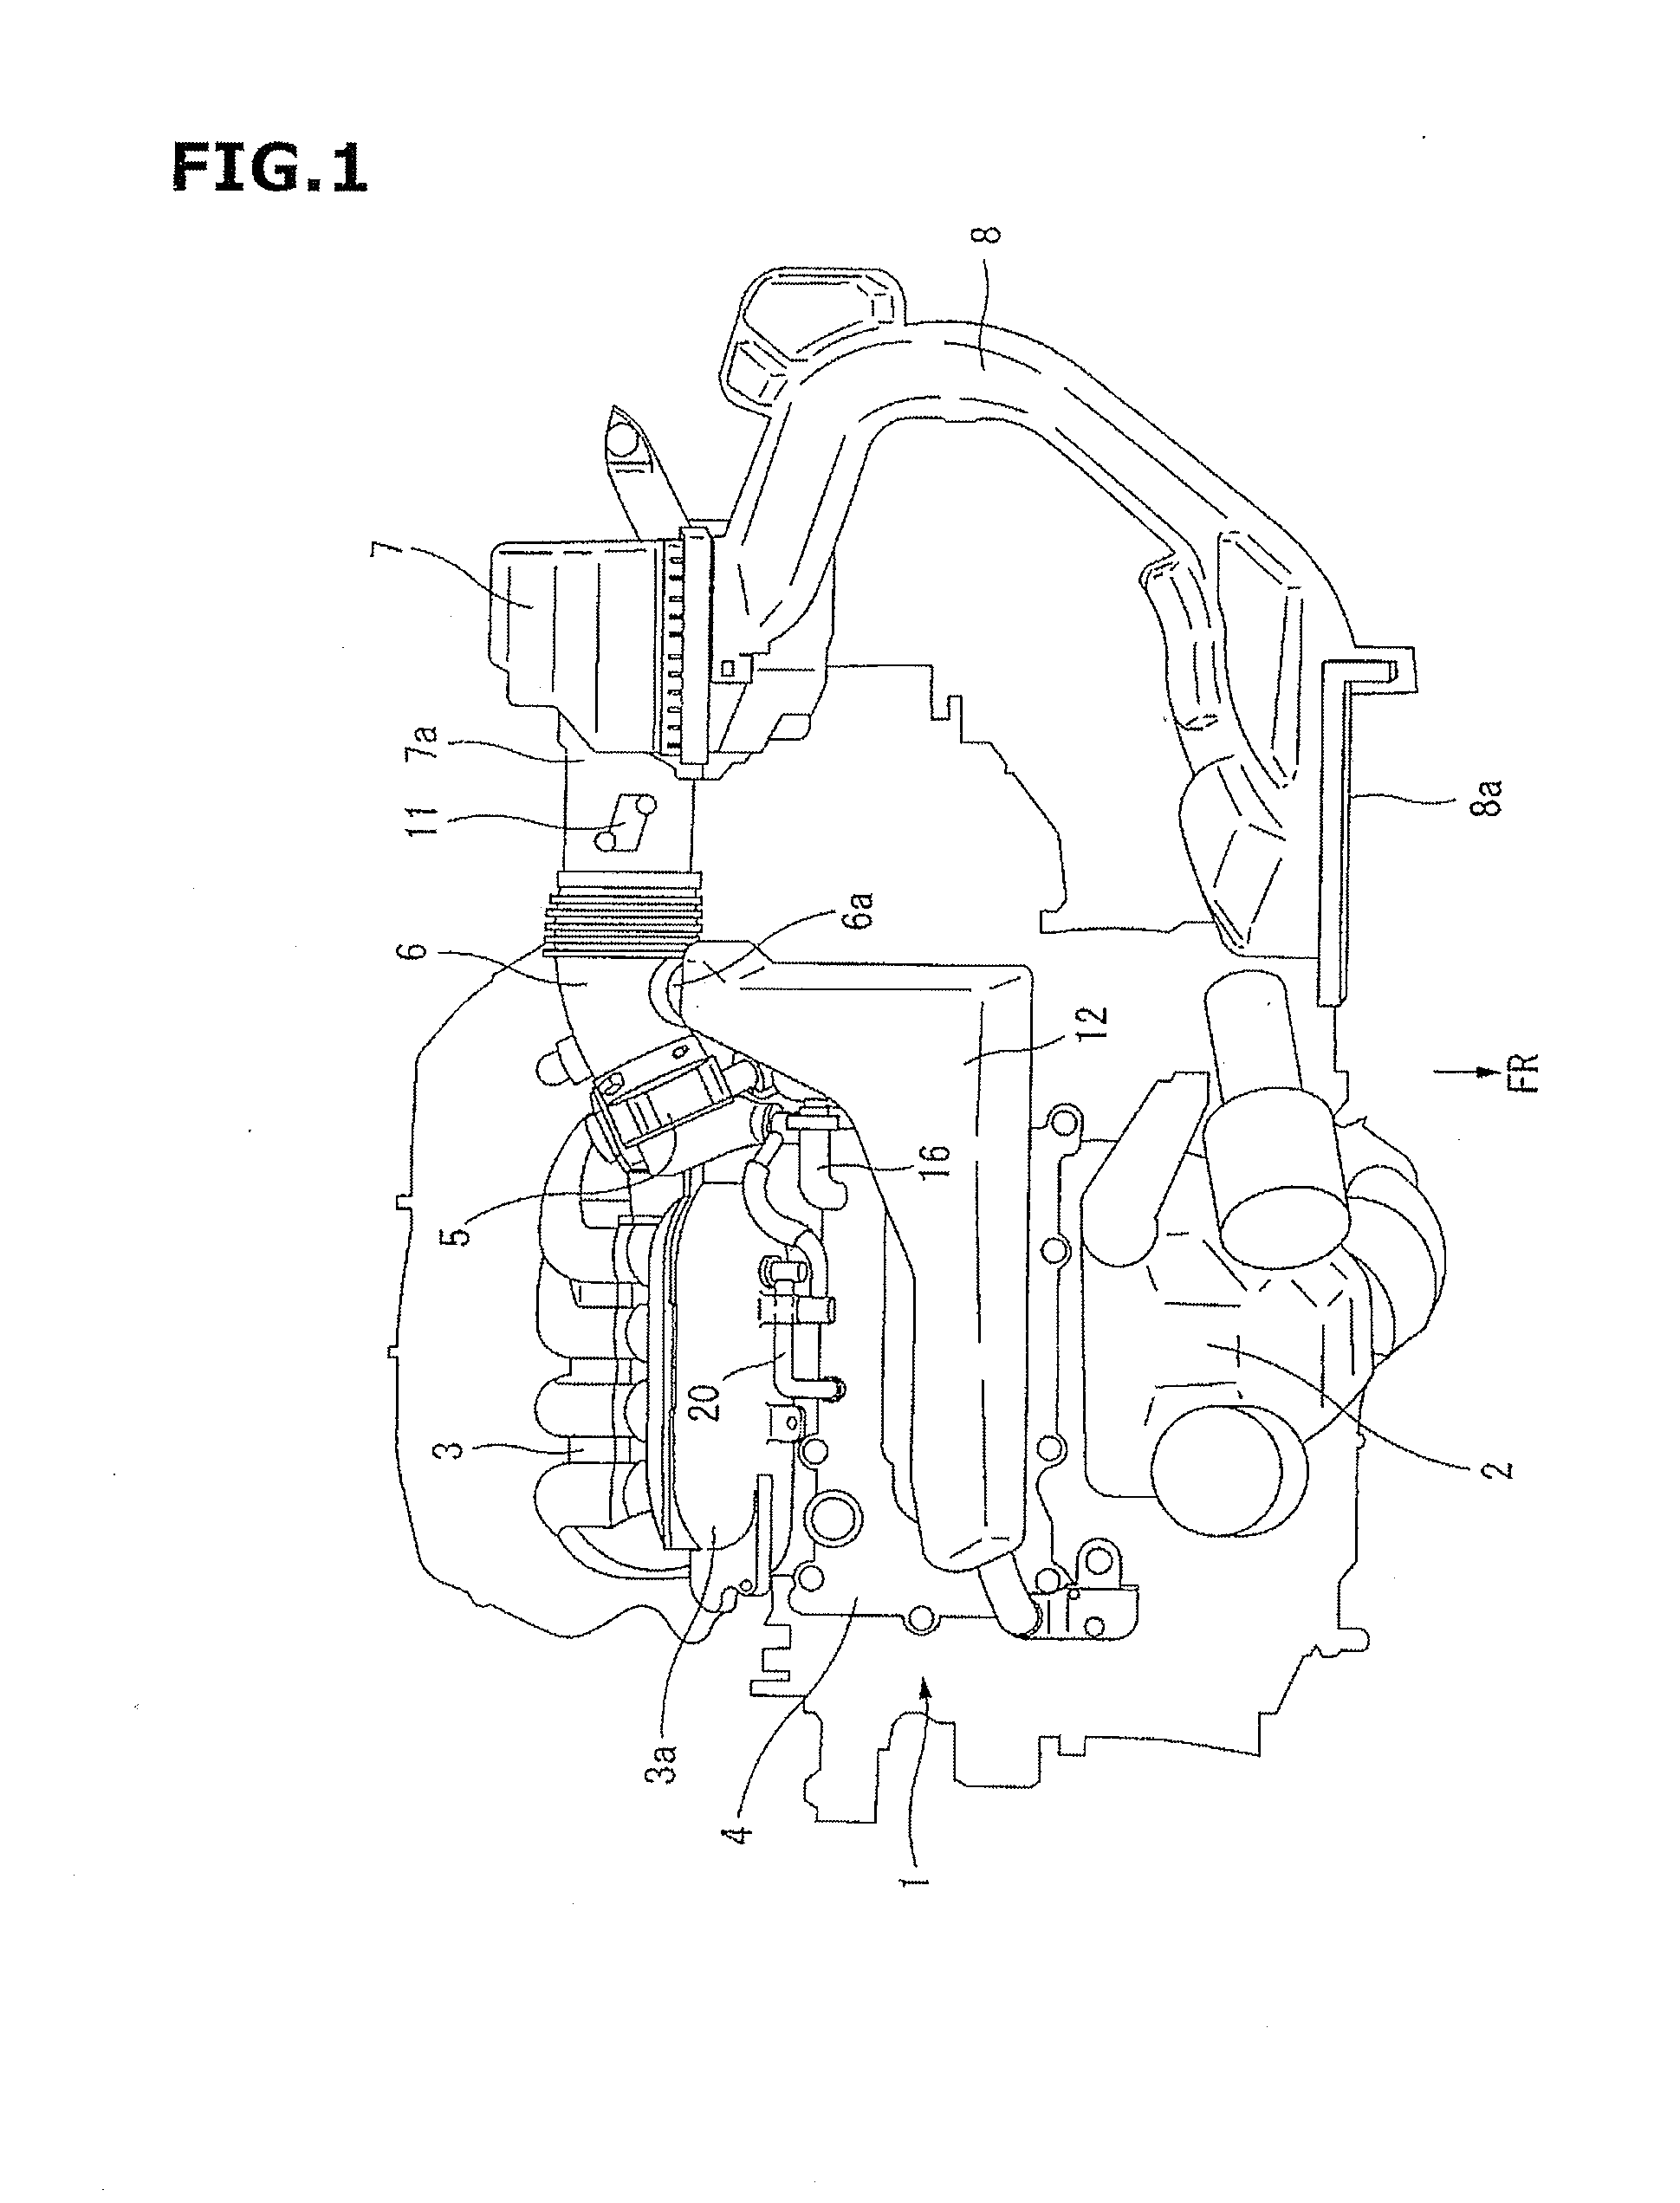 Blow-by gas treatment device for internal combustion engine